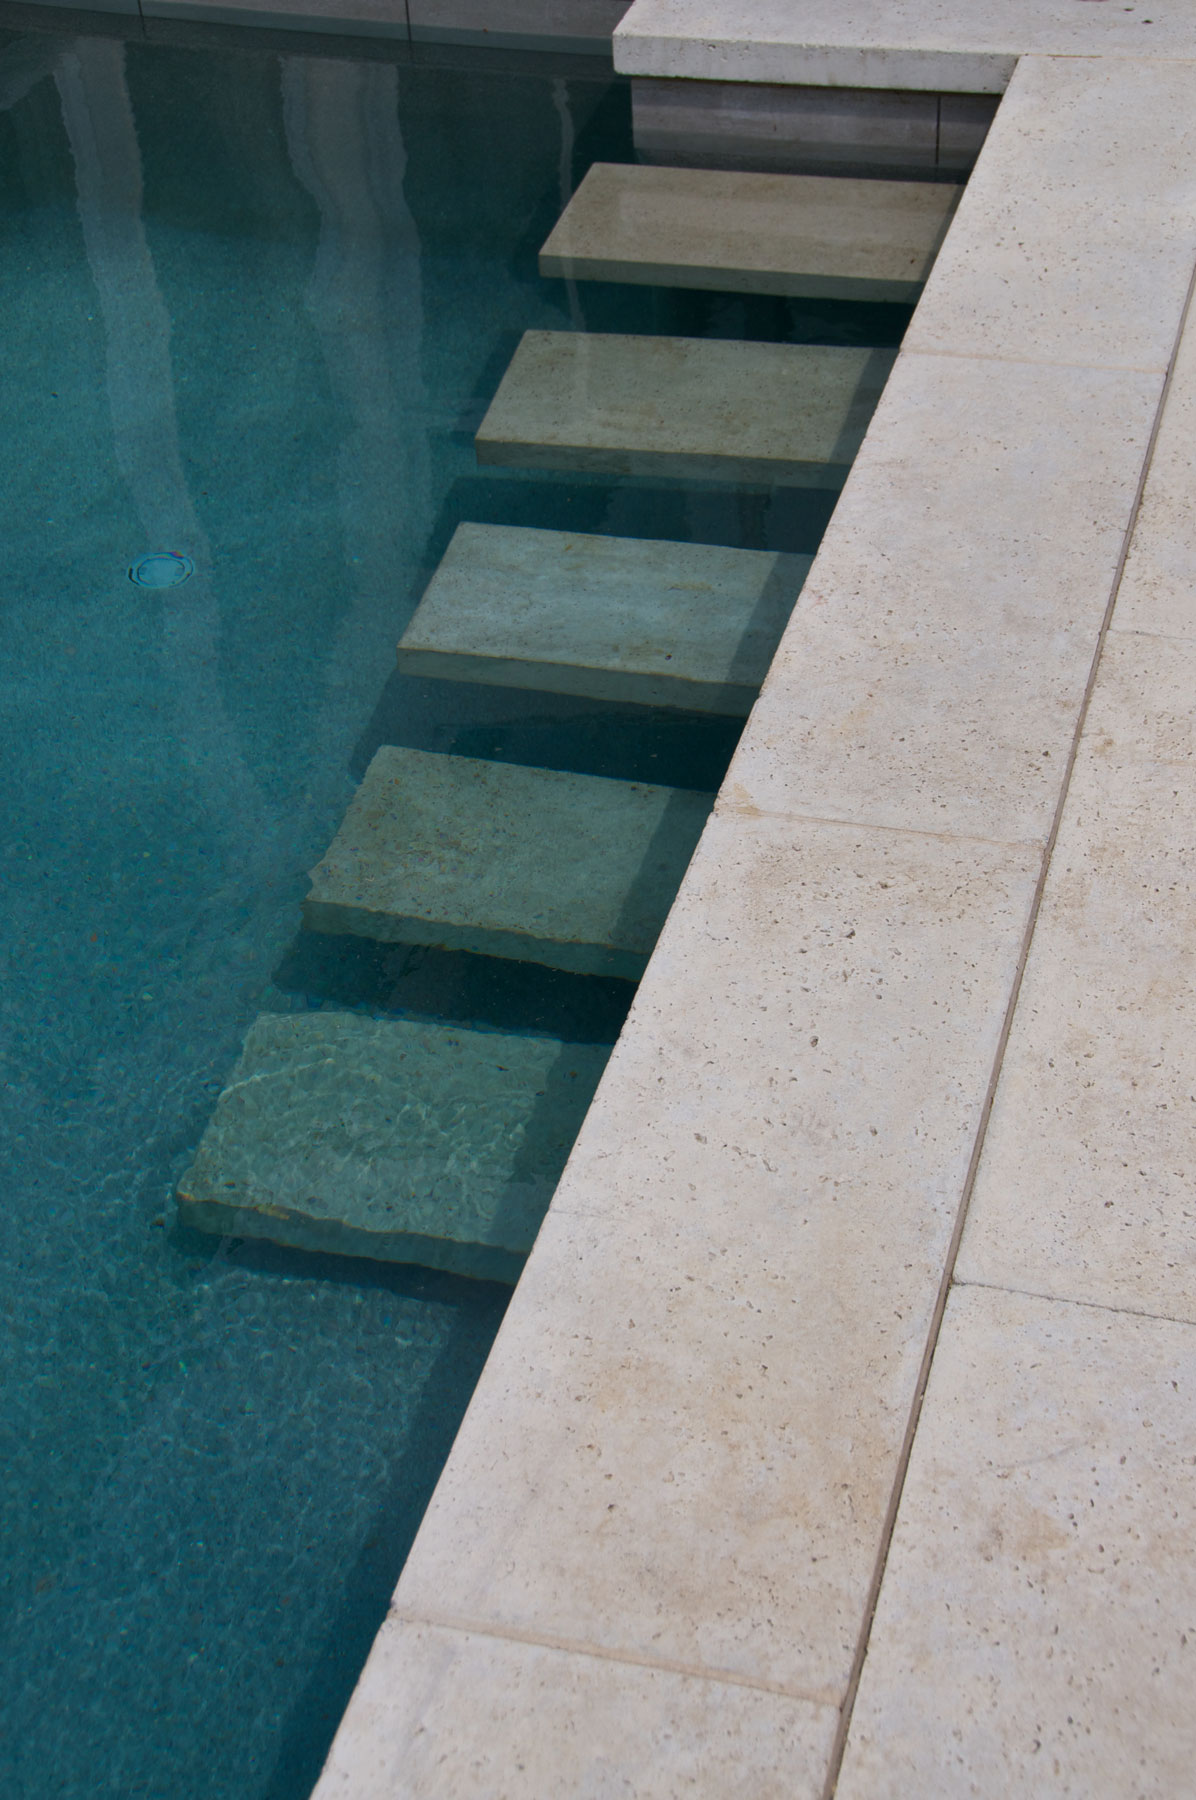 The inground pool steps are a similar material to the coping pavers